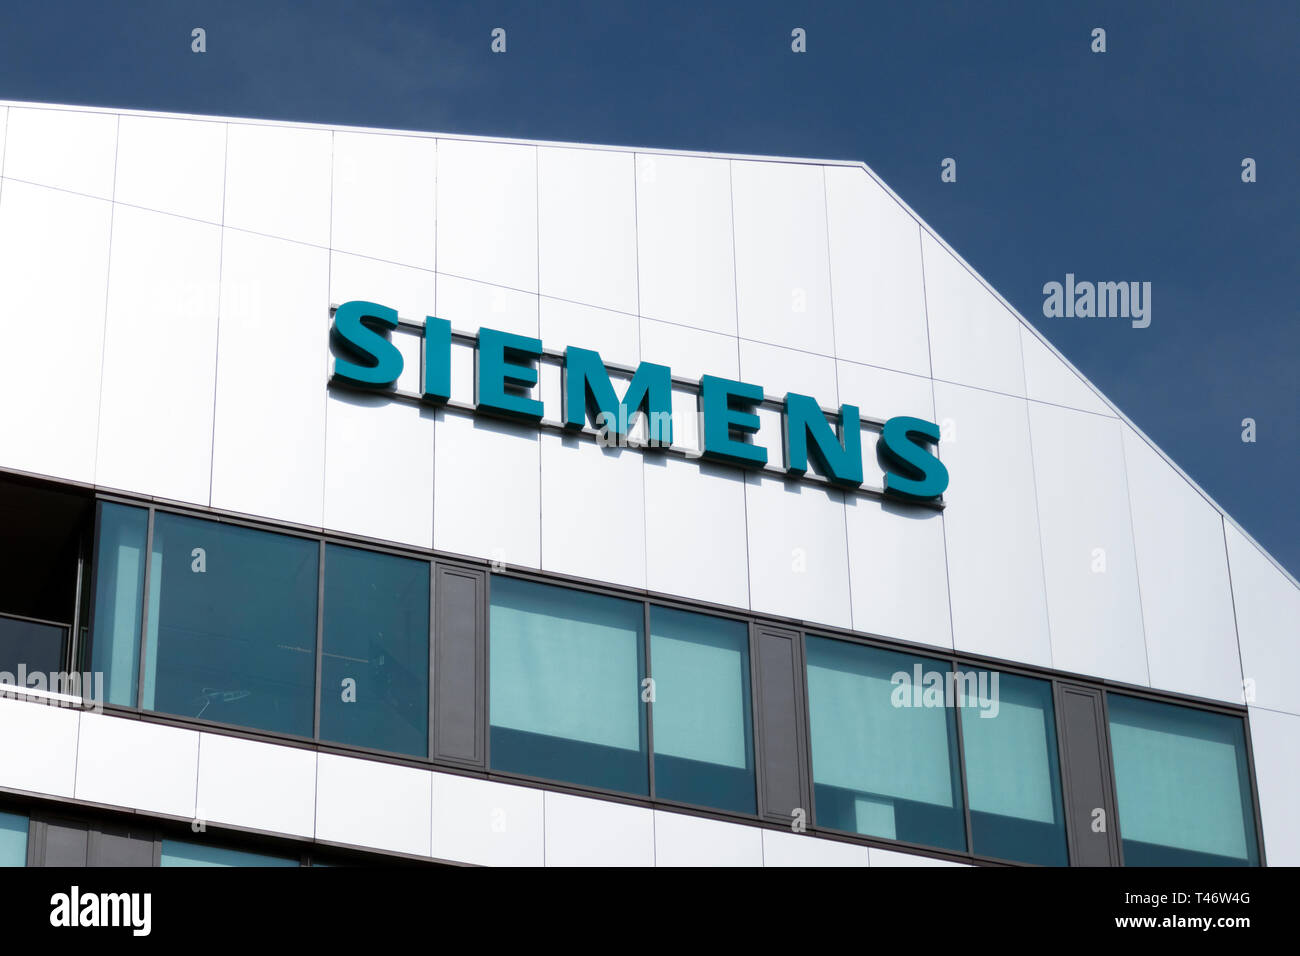 Rotterdam, Netherlands 4 april 2019; Facade of the Siemens building in Rotterdam in the Netherlands Stock Photo